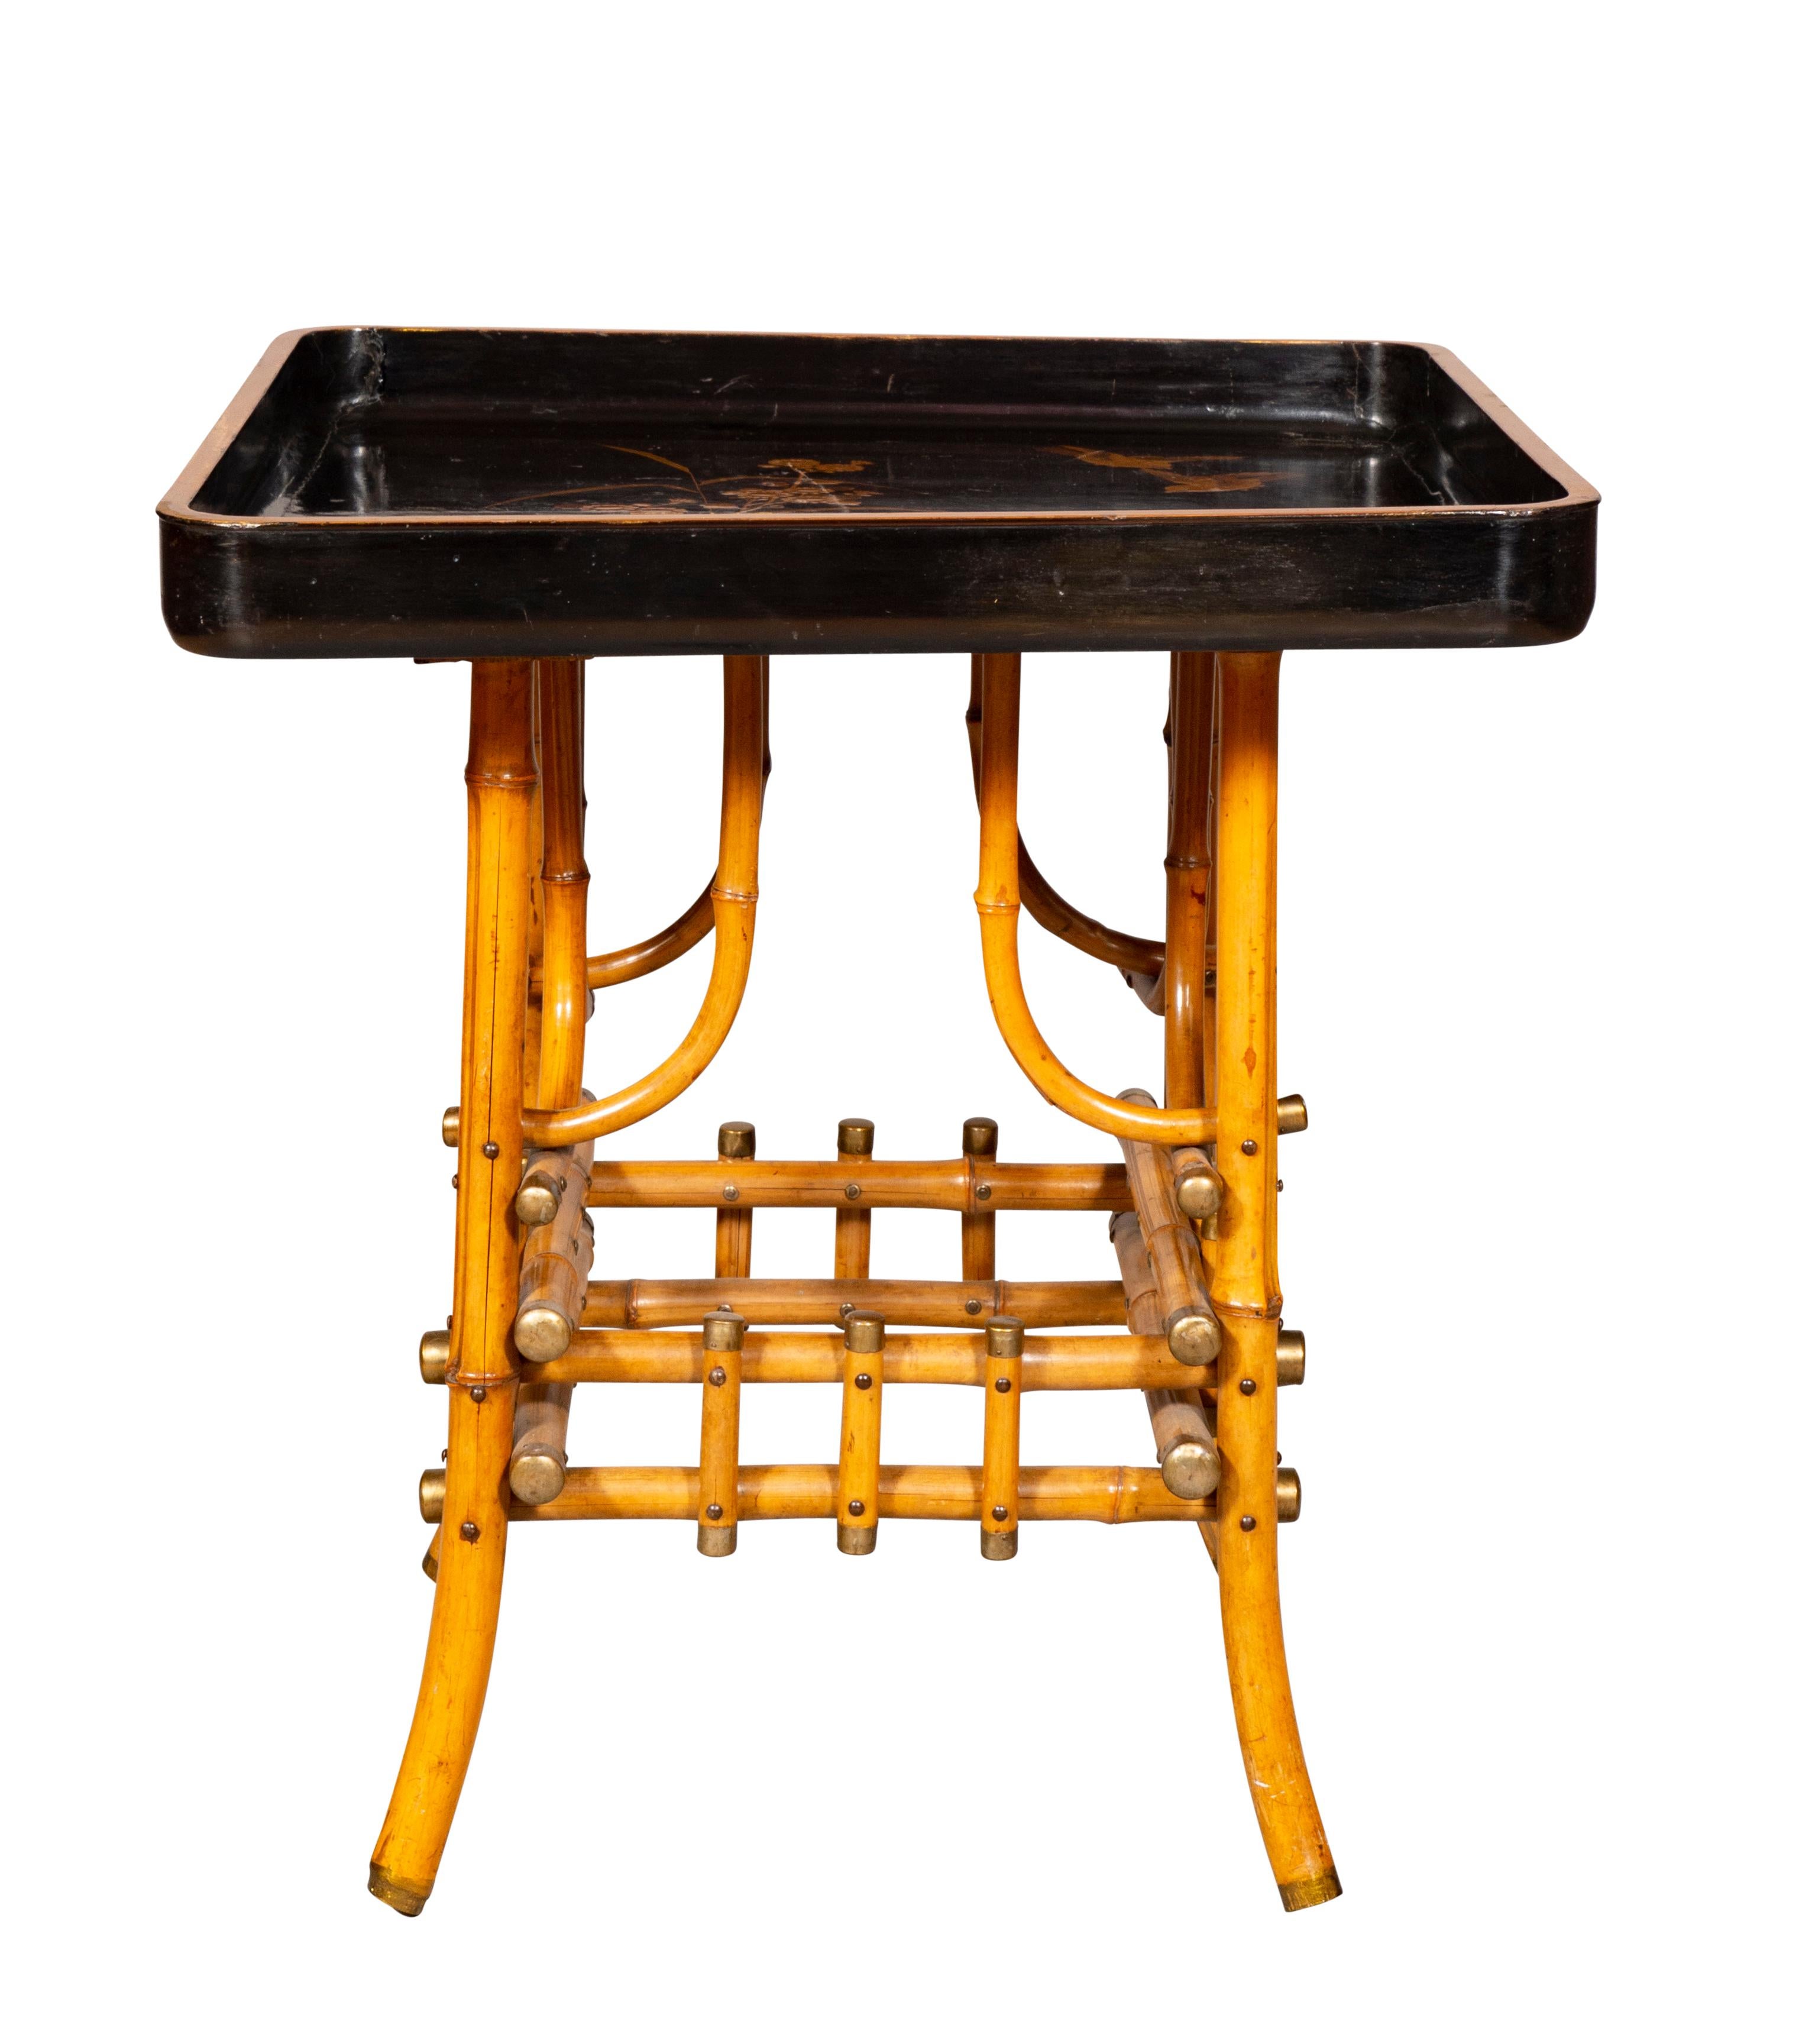 Square black lacquer tray with gold decoration on a bamboo base. From William Hodgins Inc.